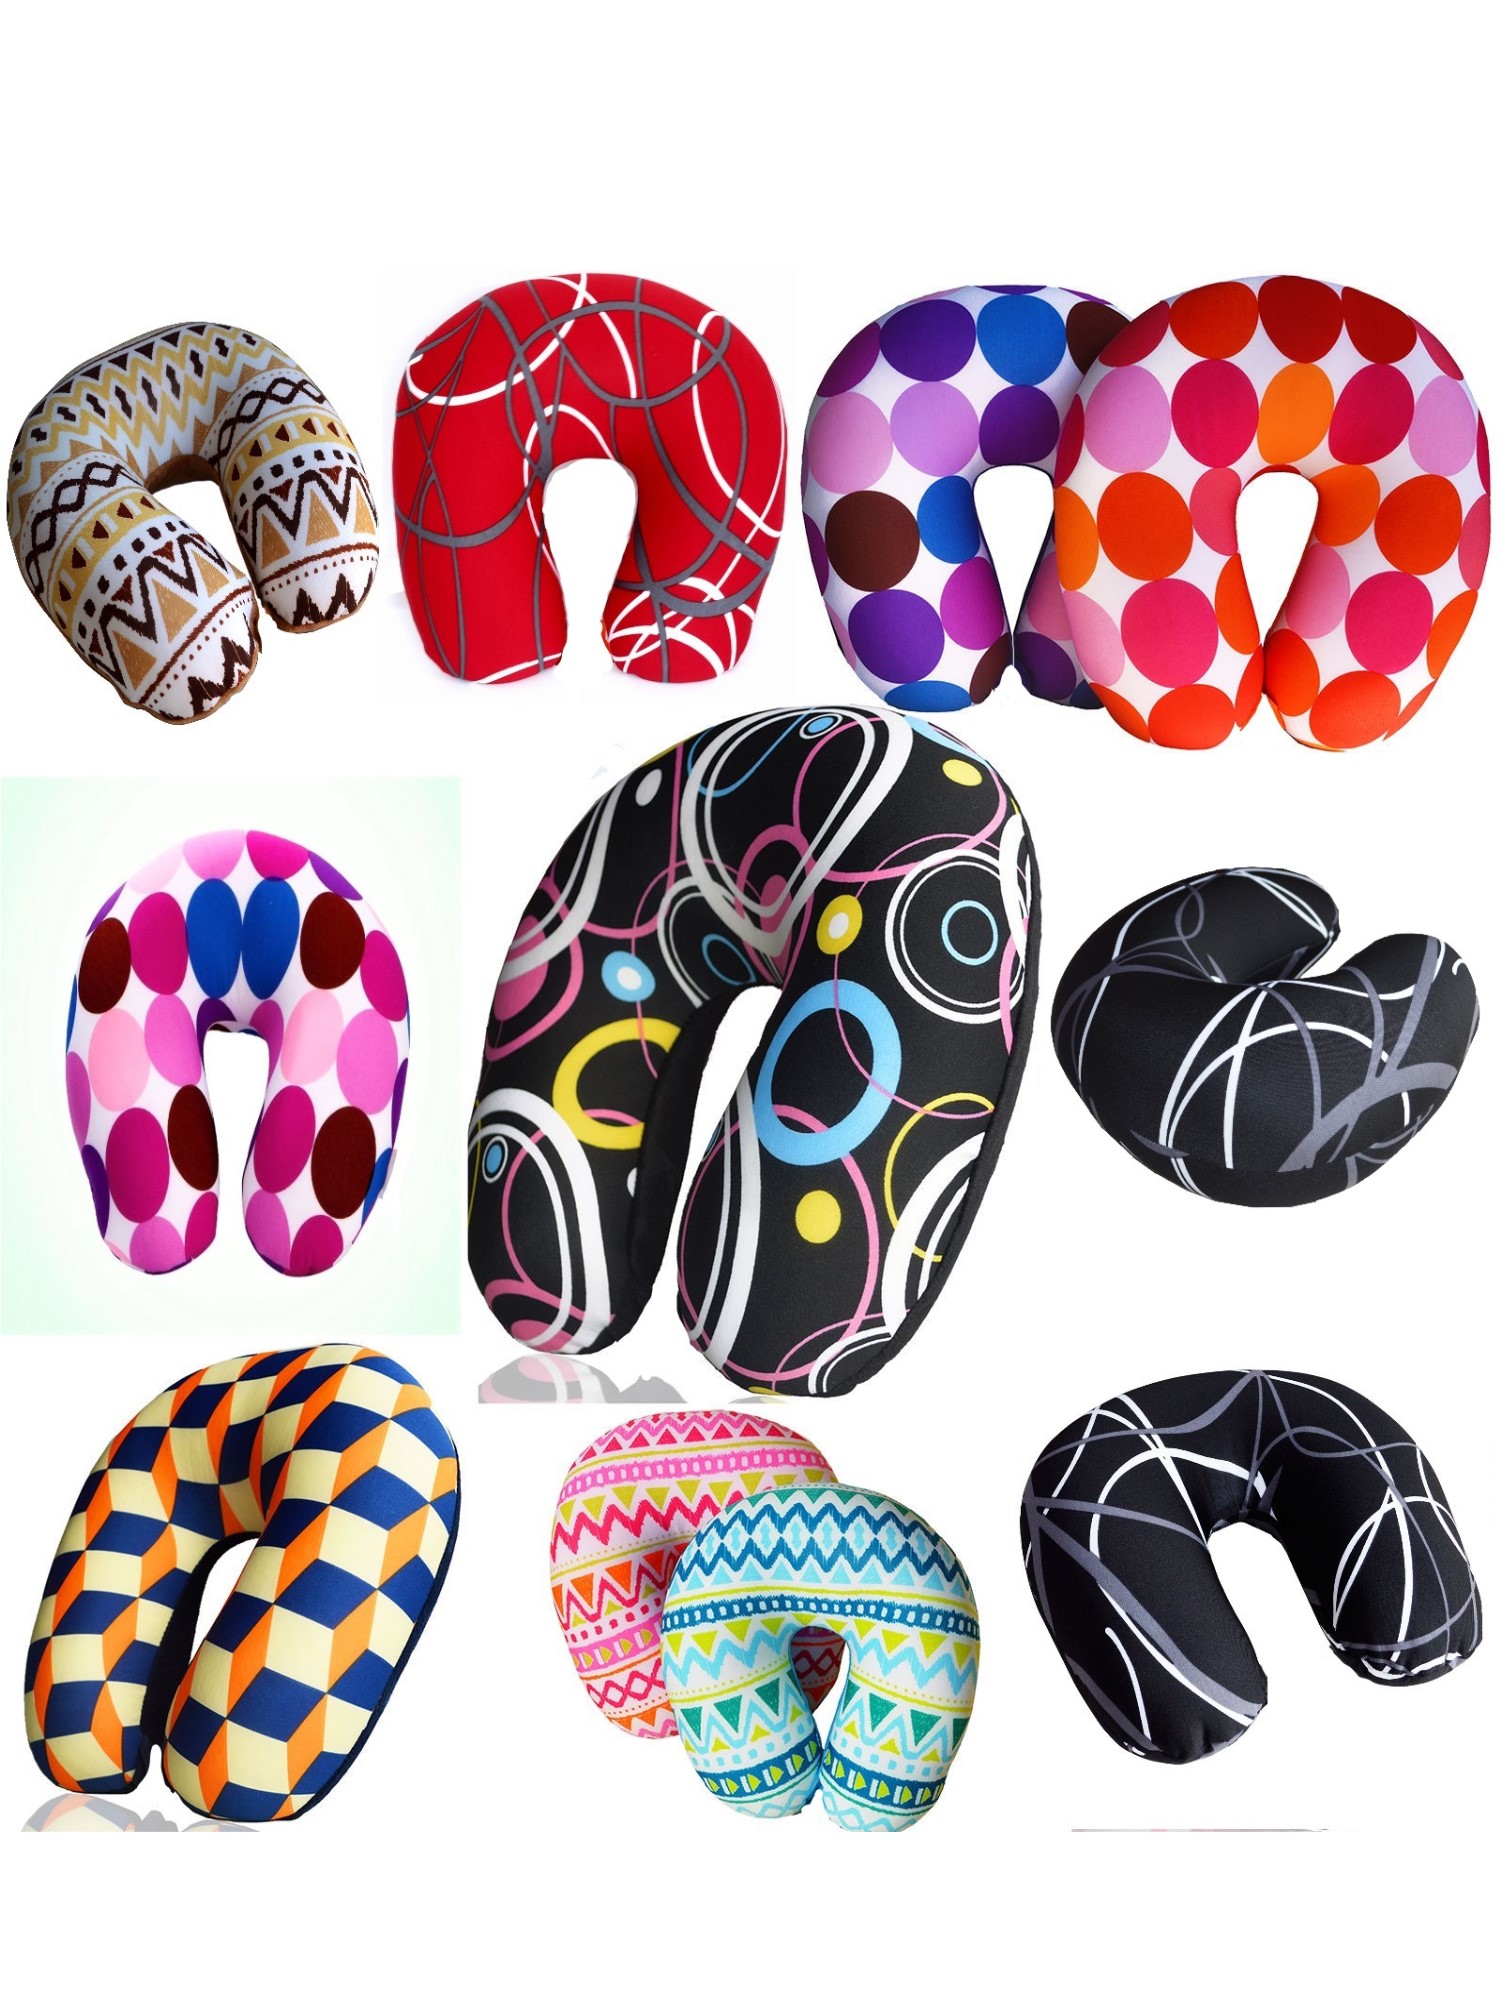 Bookishbunny Ultralight Micro Beads U Shaped Neck Pillow Travel Head Cervical Support Cushion Red Black - image 5 of 5